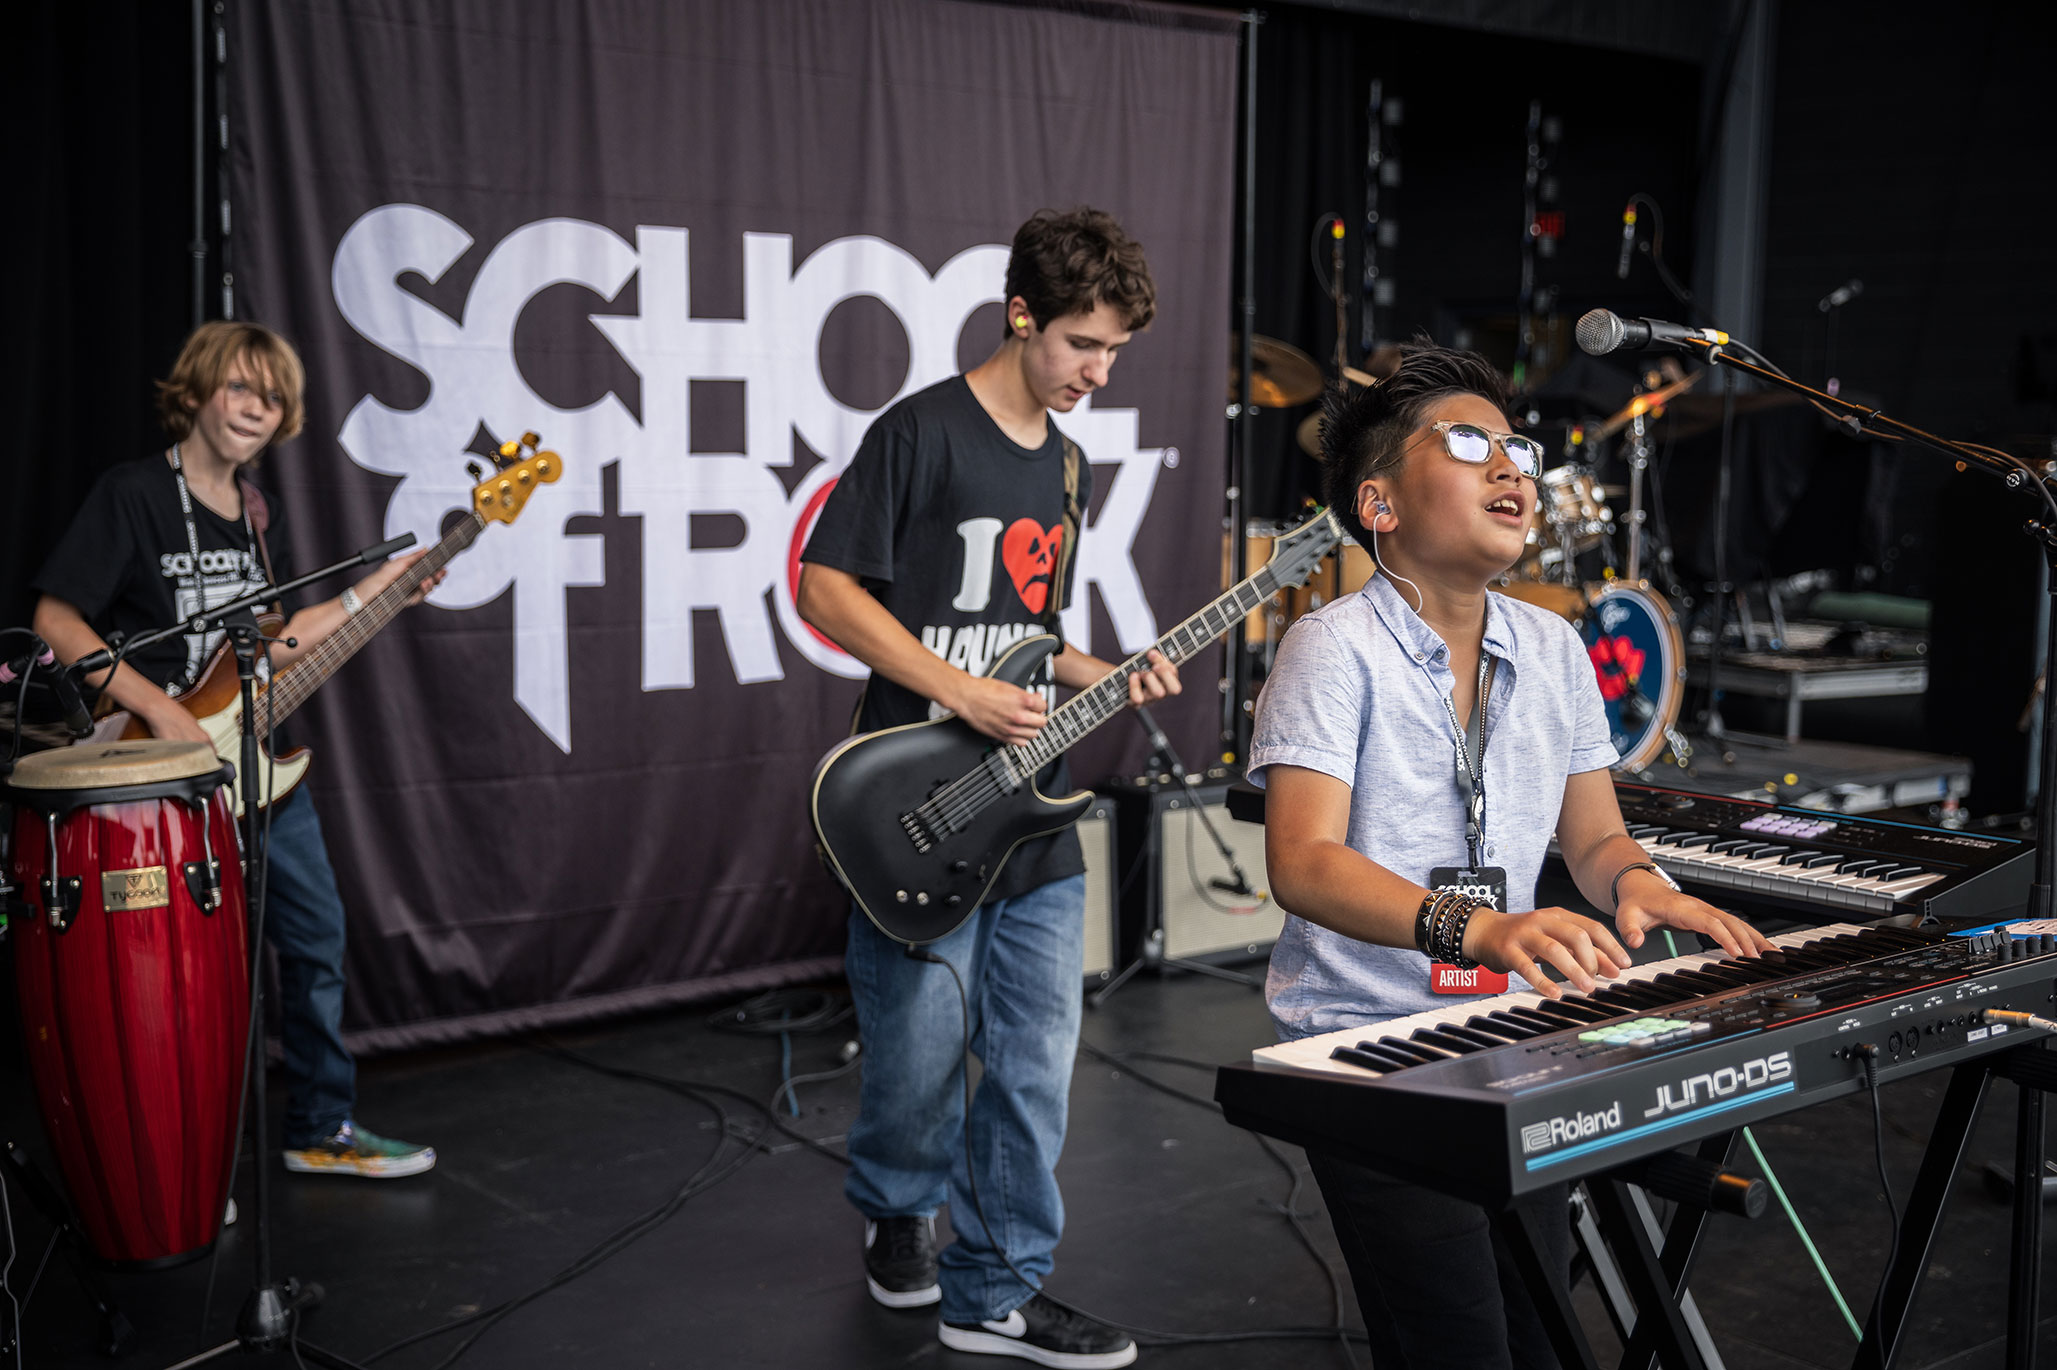 School of Rock students performing on stage at Summerfest in Milwaukee, WI